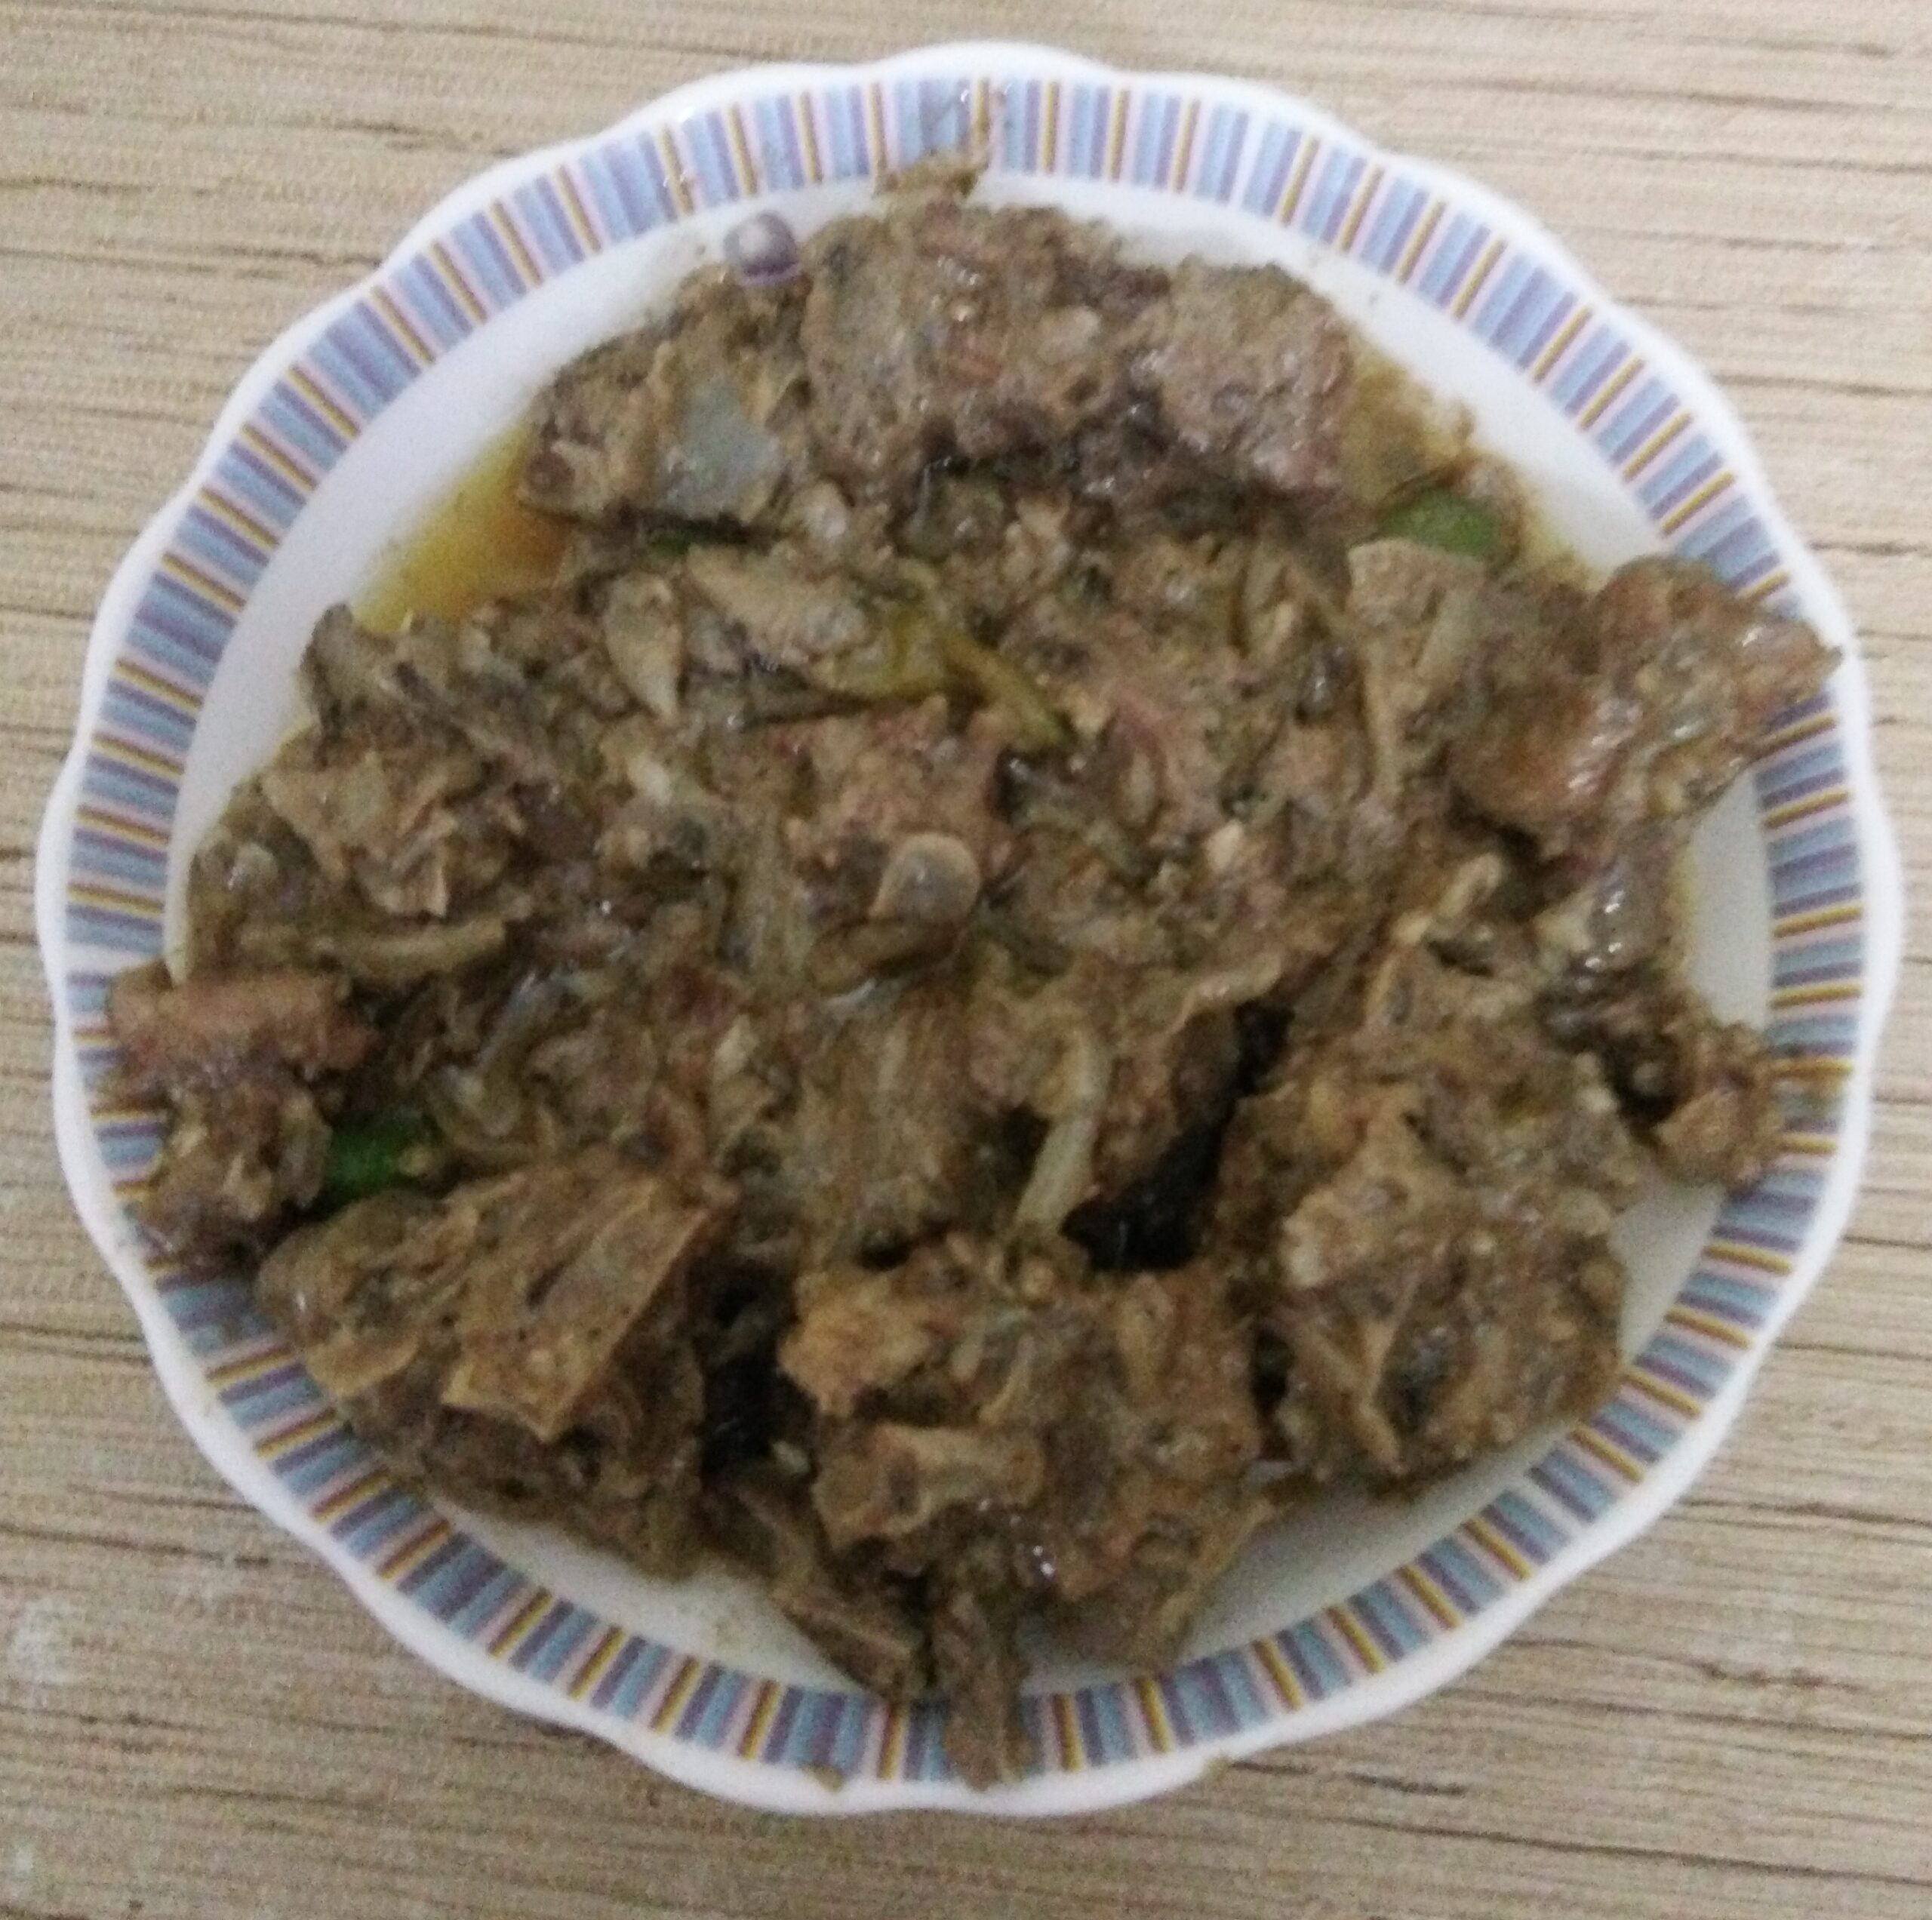 Mutton Malai is a great Mughlai dish and tastes awesome